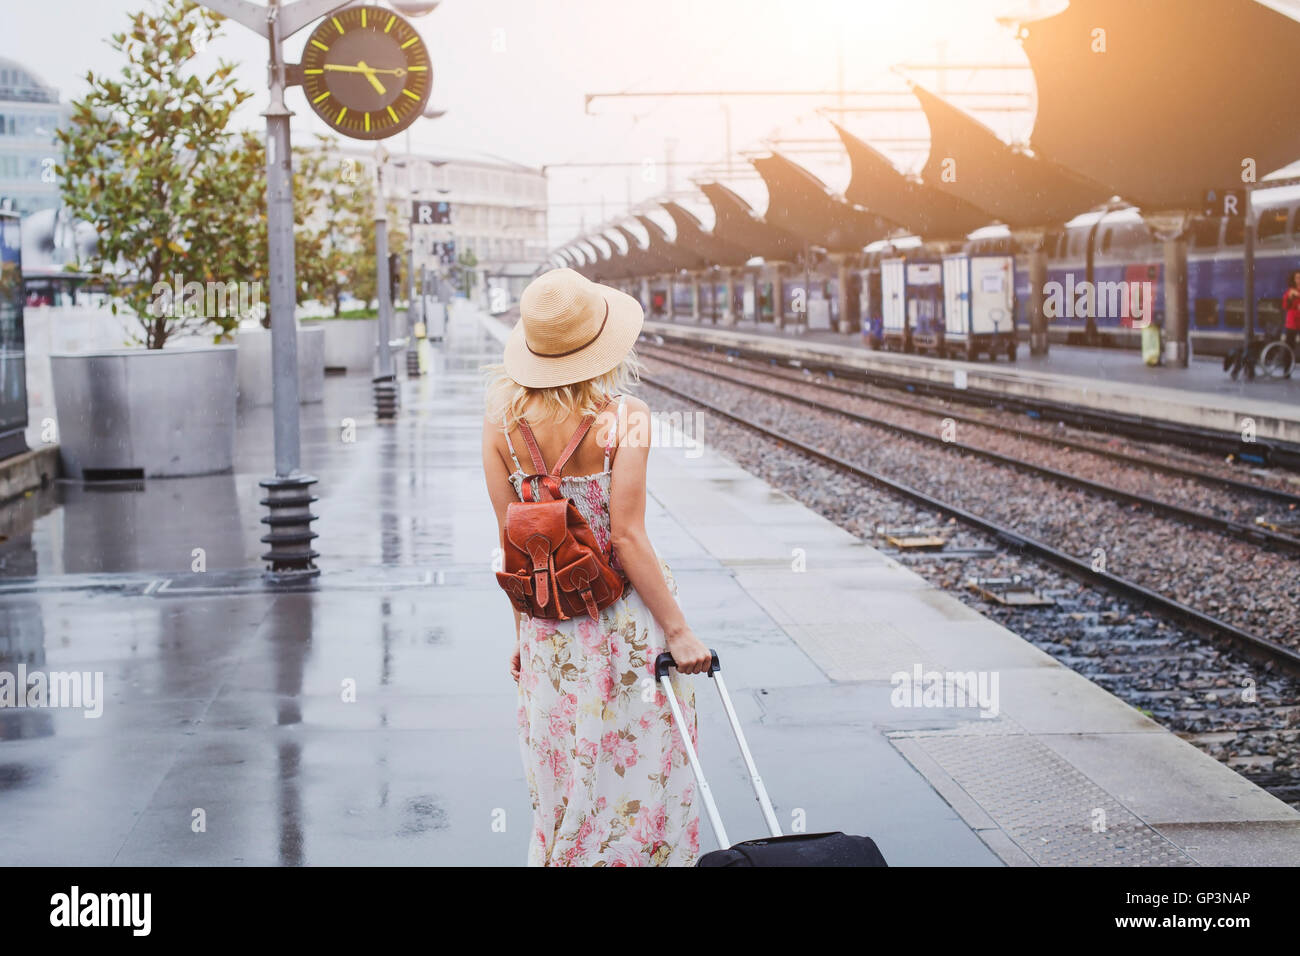 travel by train, woman with luggage waiting on platform of railway station Stock Photo